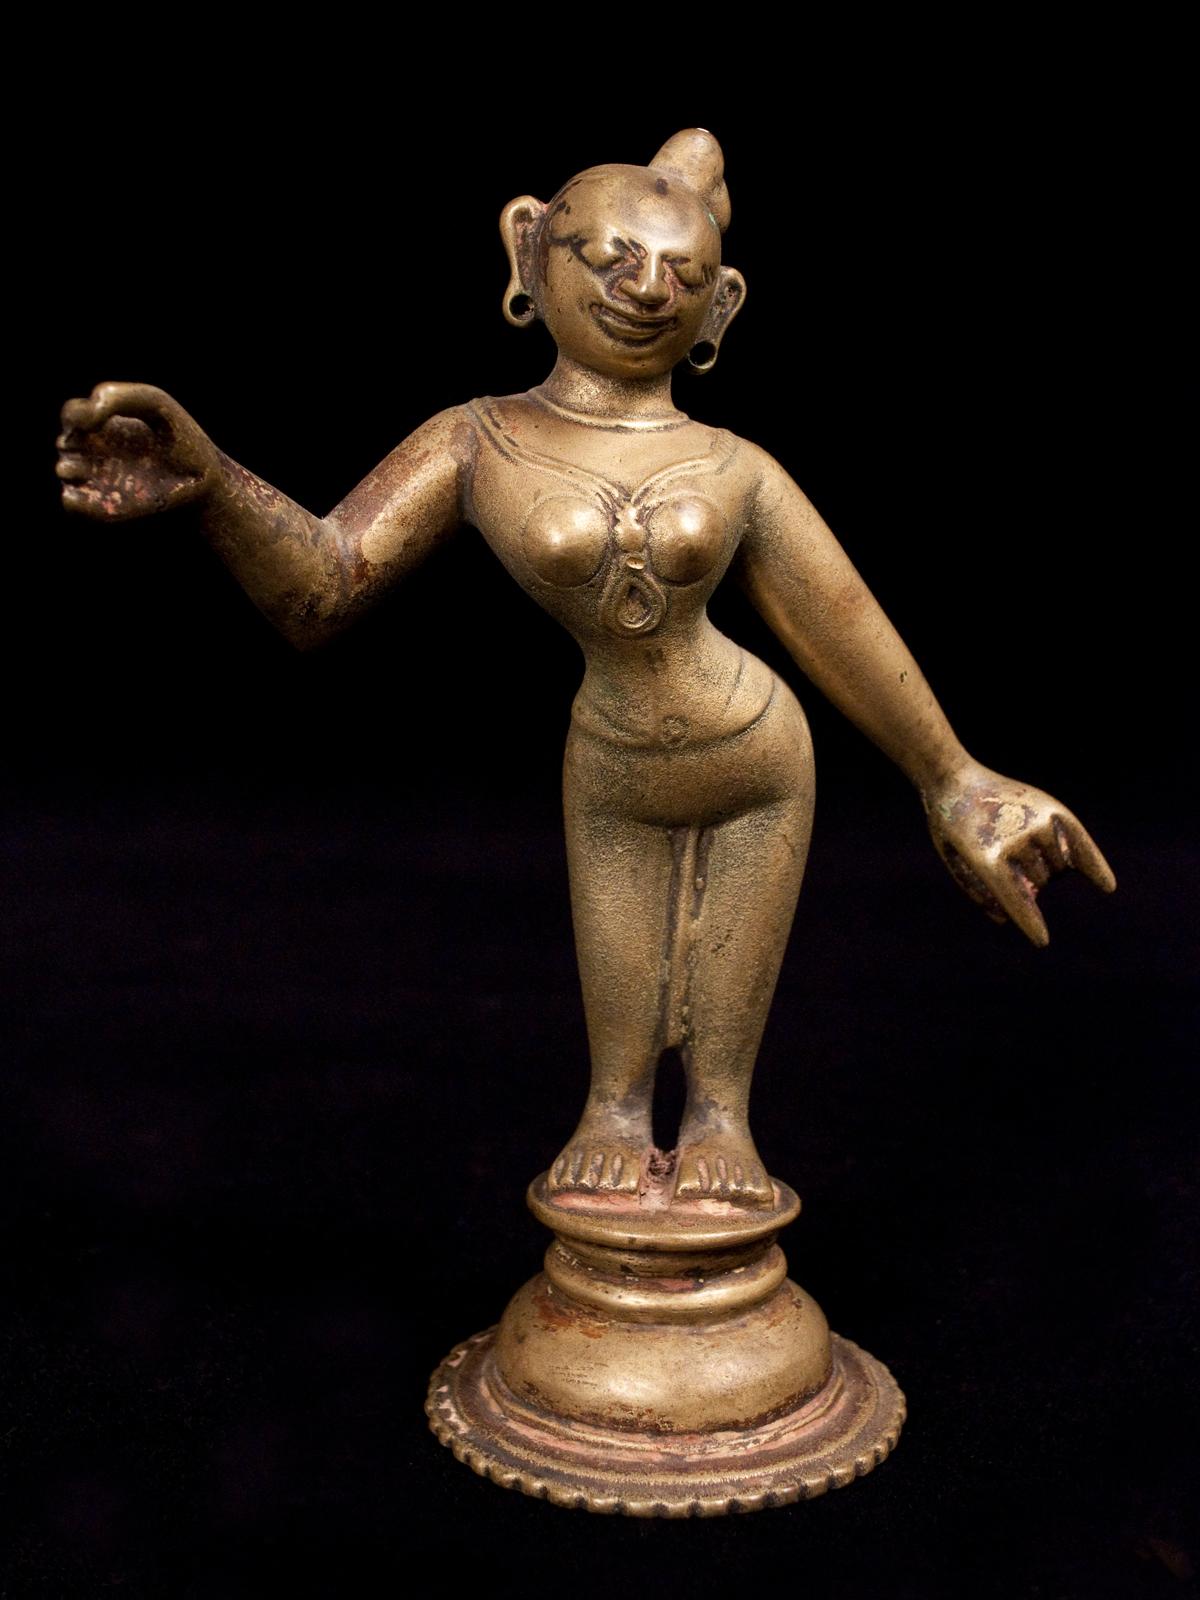 18th-19th century lost wax cast bronze Radha, wife of Krishna, India

Radha was a one of the gopis (milkmaids or cowherds) who Krishna played and danced with as a child. They developed a divine love and she became his favourite. Some believe her to